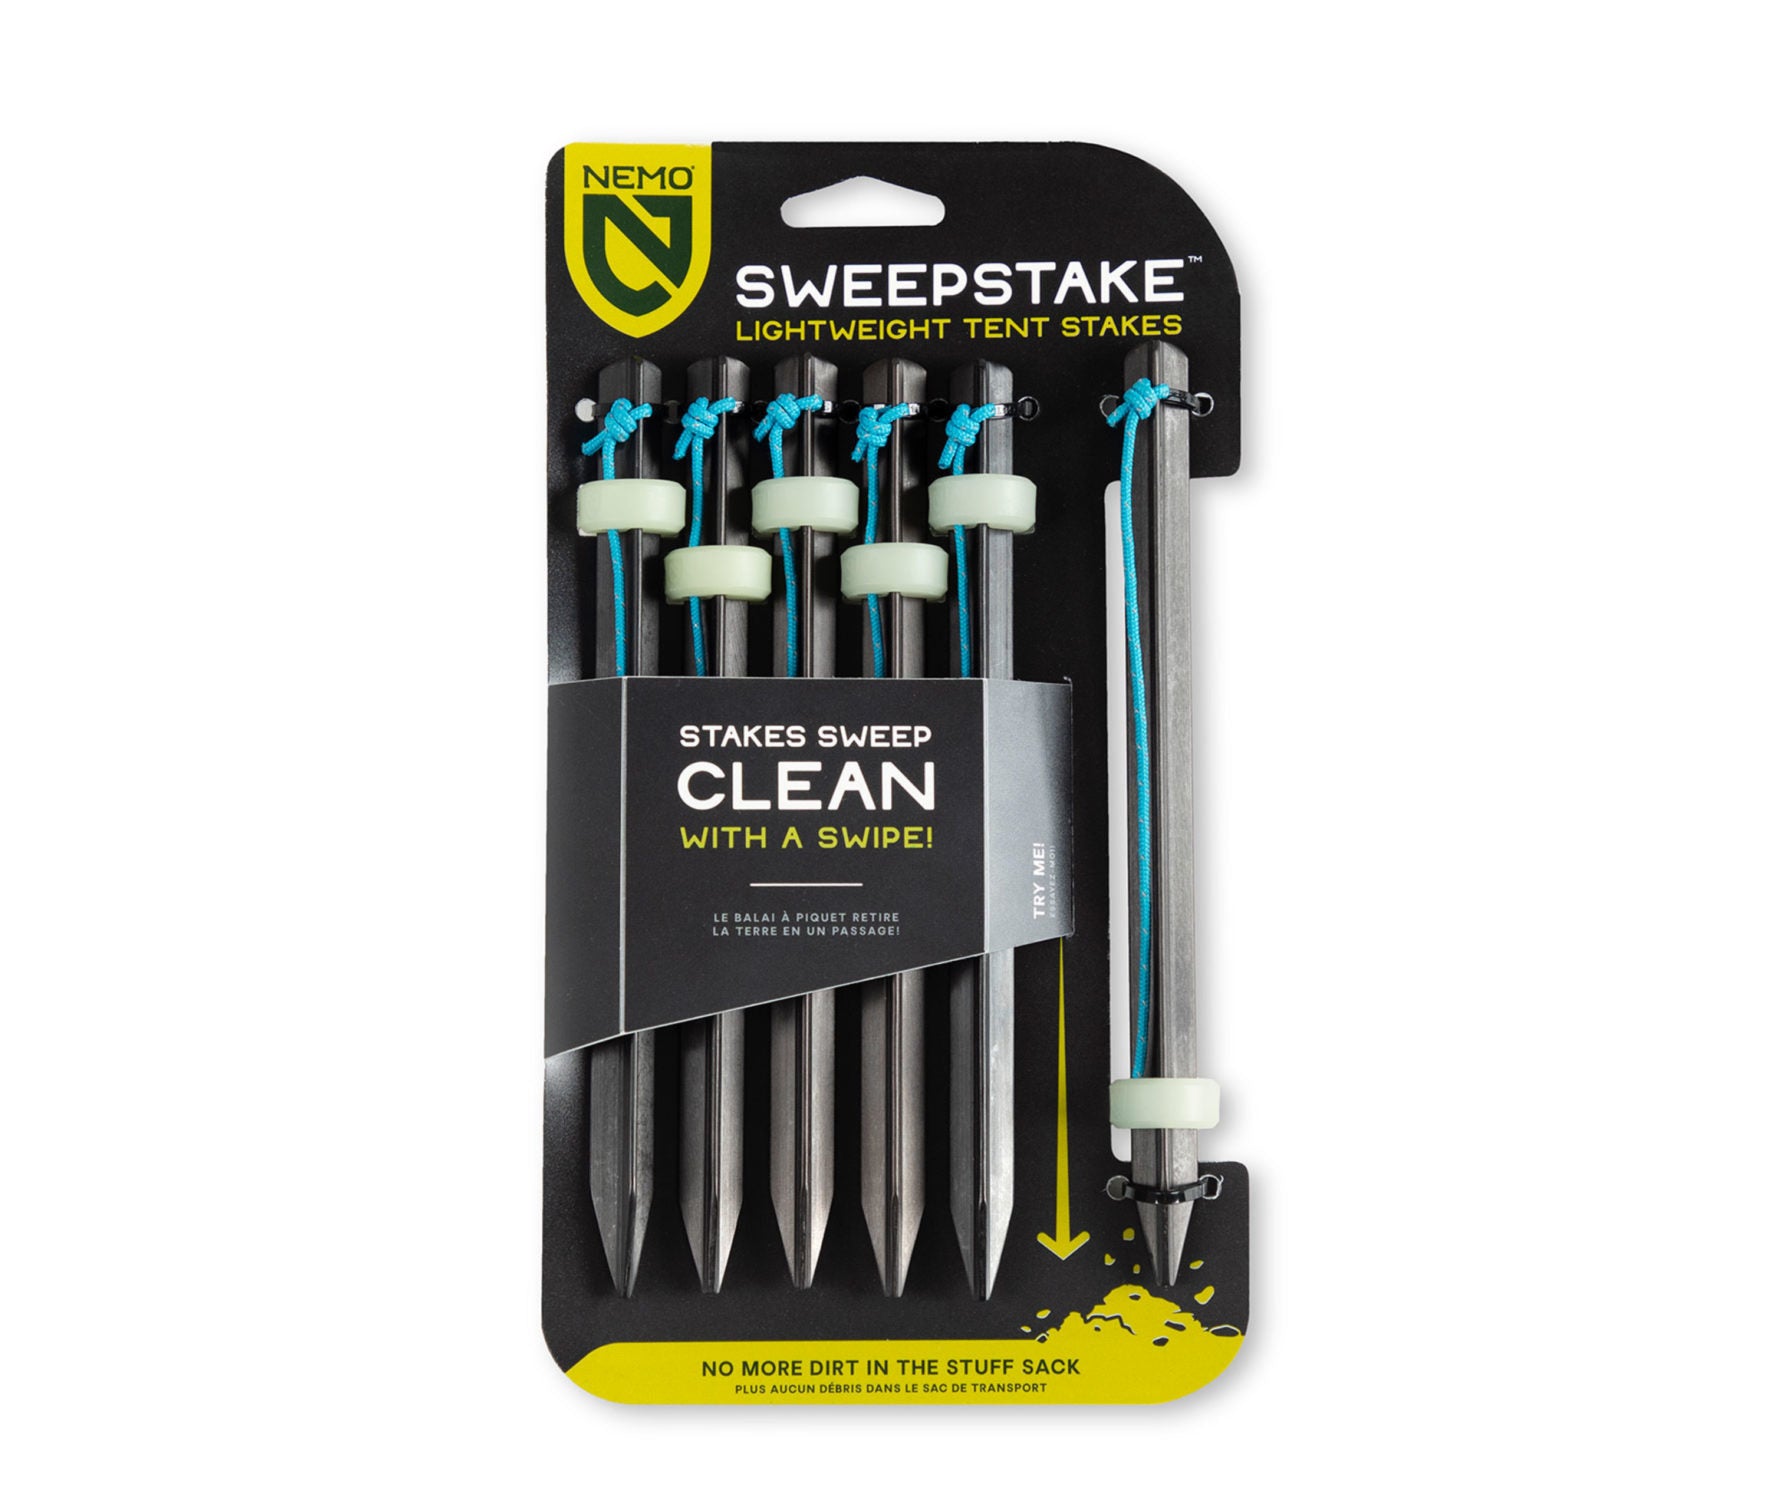 sweepstake™ lightweight tent stakes